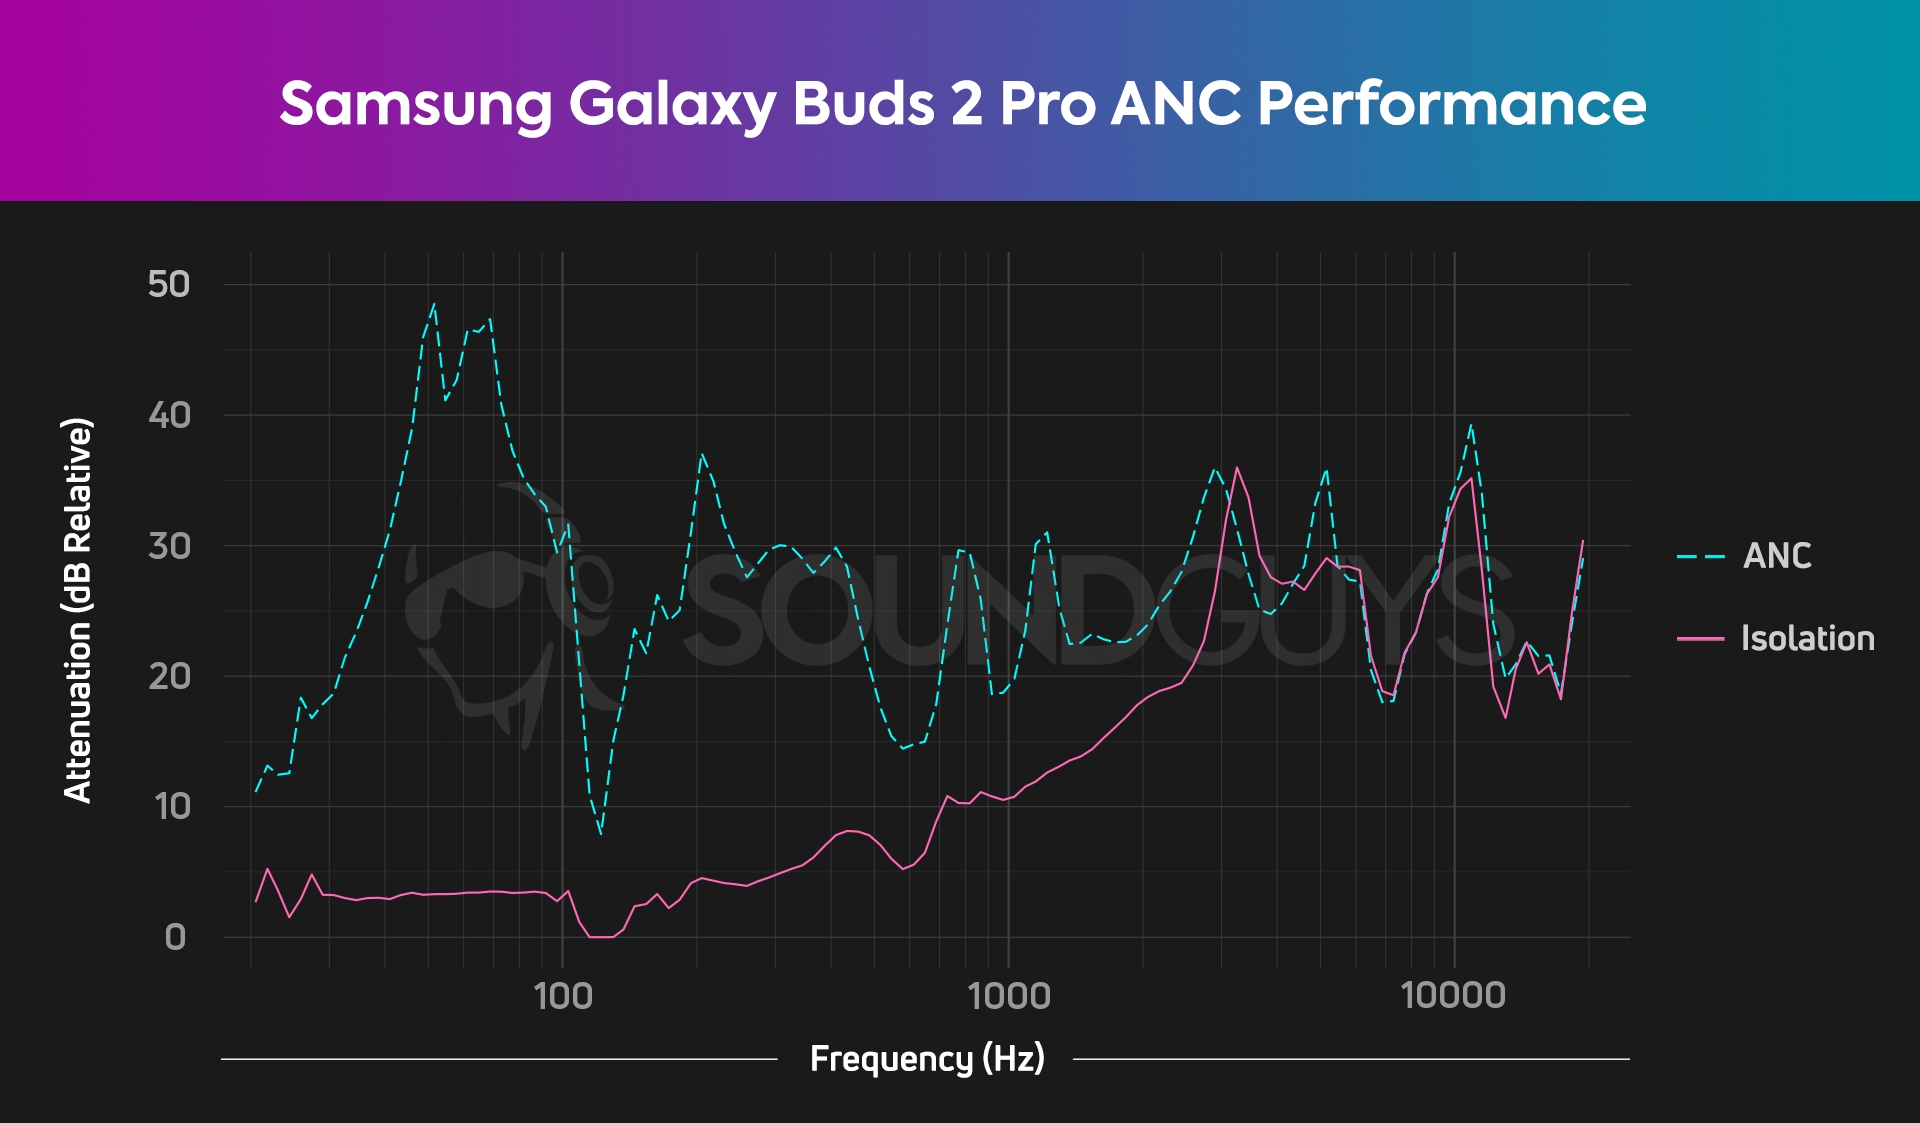 A chart depicts the very impressive ANC and isolation performance of the Samsung Galaxy Buds 2 Pro.